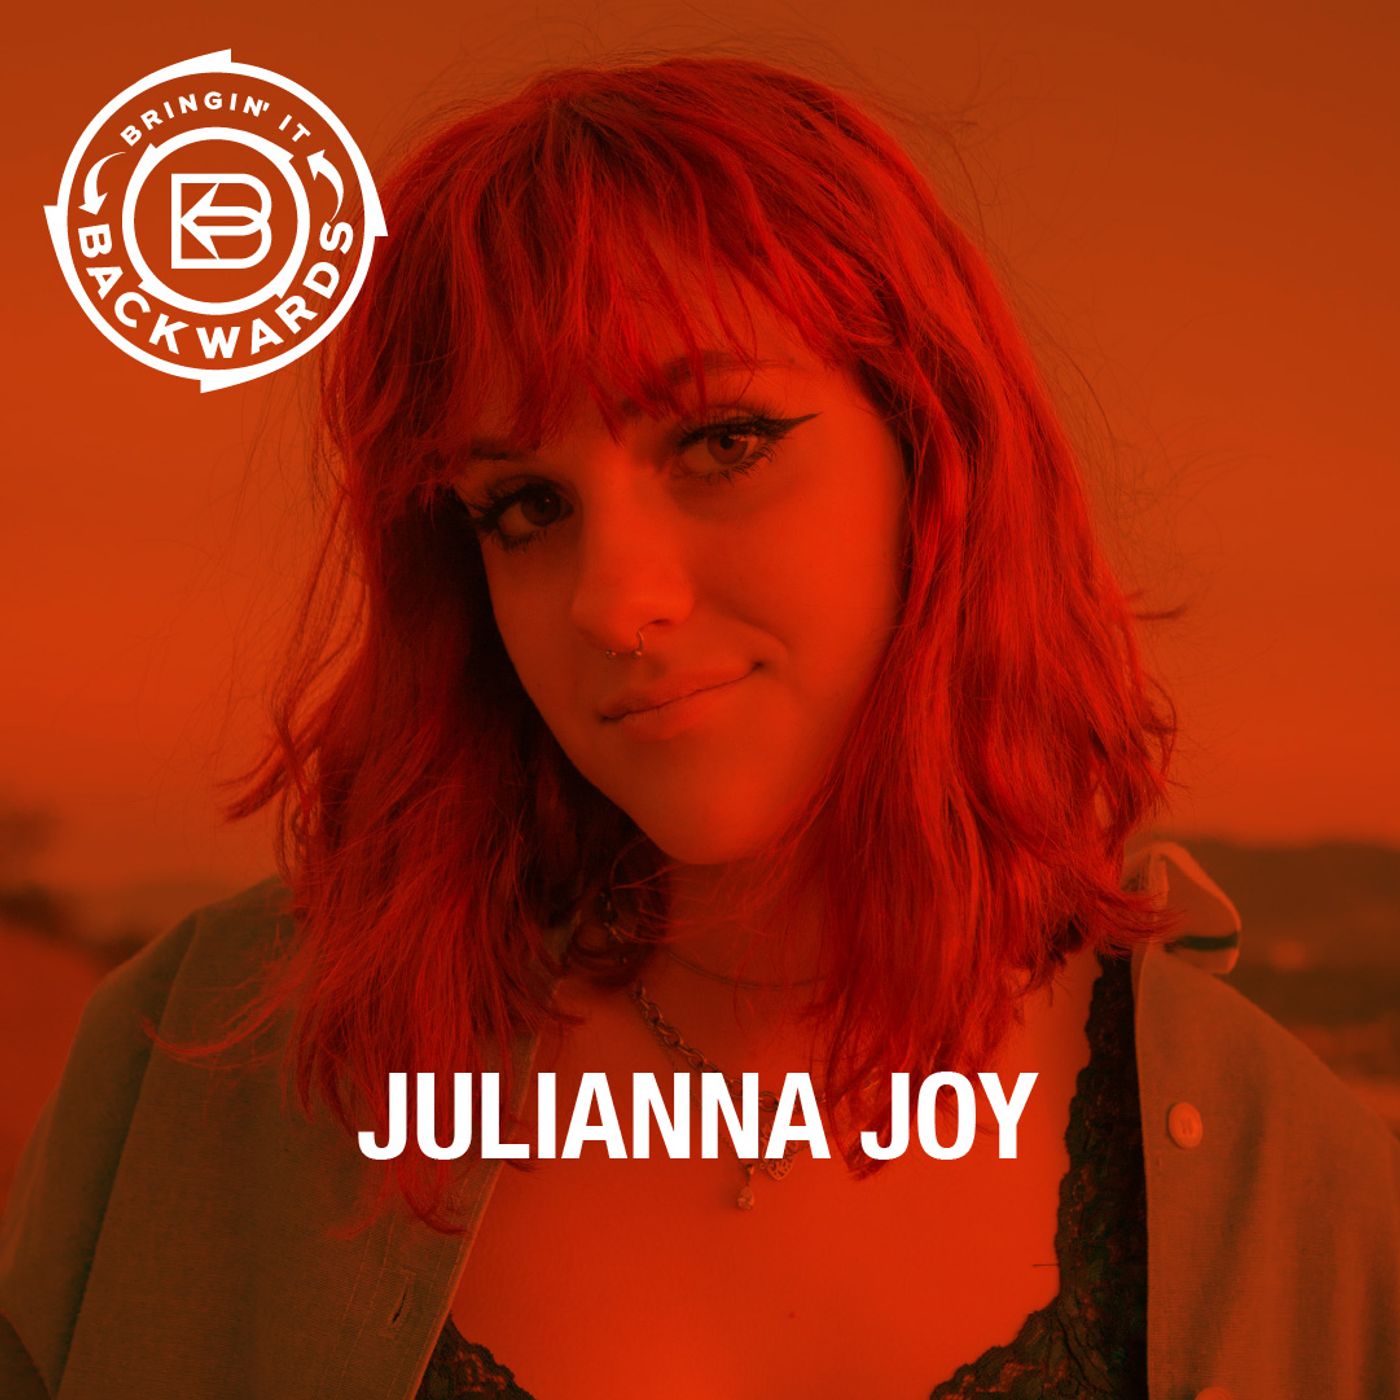 Interview with Julianna Joy Image